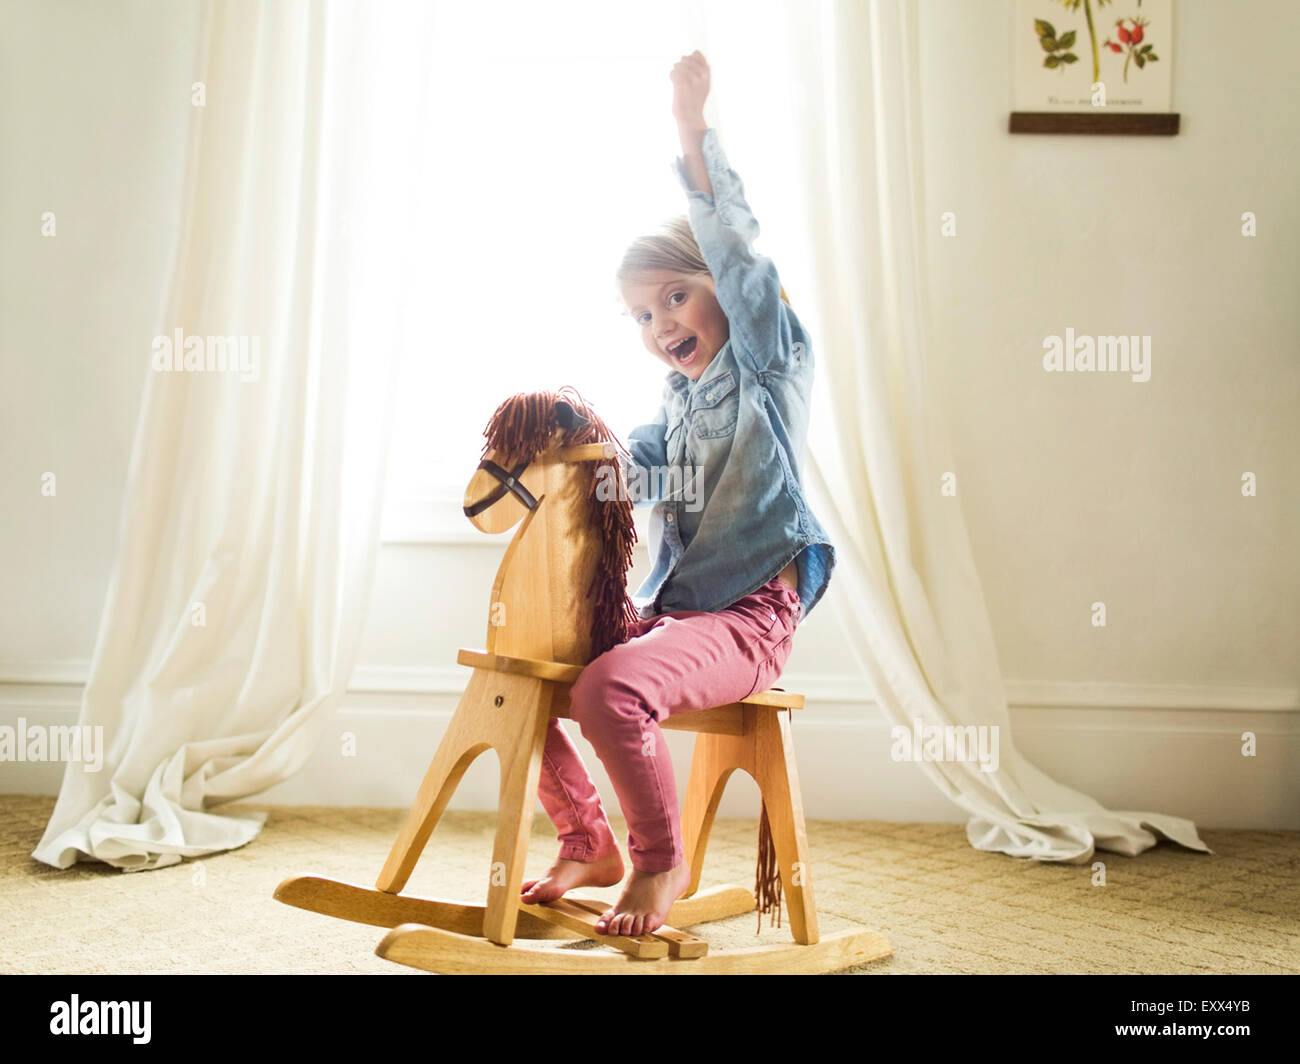 Girl On Horse High Resolution Stock Photography and Images - Alamy